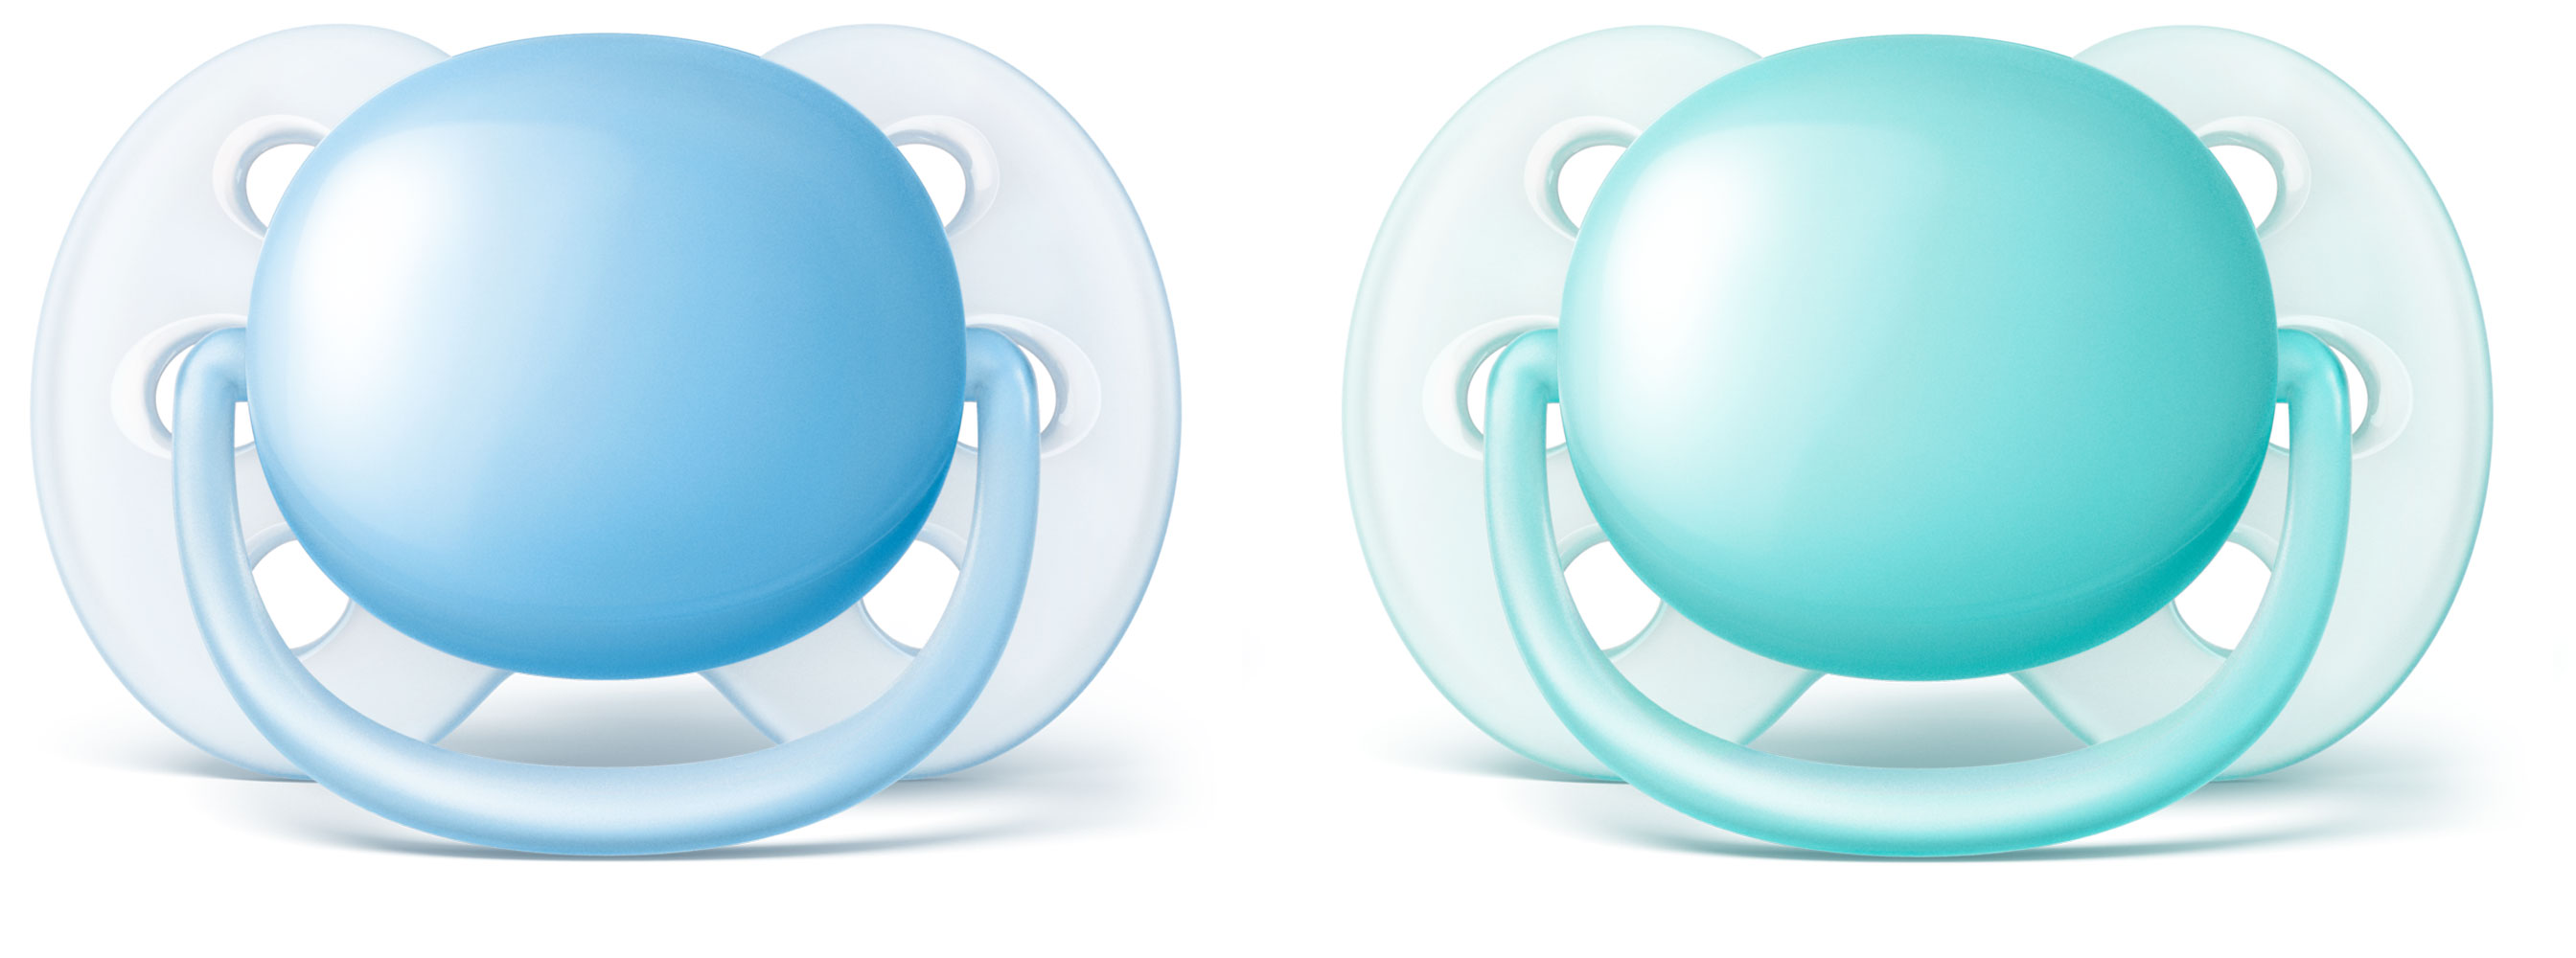 Philips AVENT Ultra Soft pacifier 0-6 Months, 2-Pack - Blue/Teal